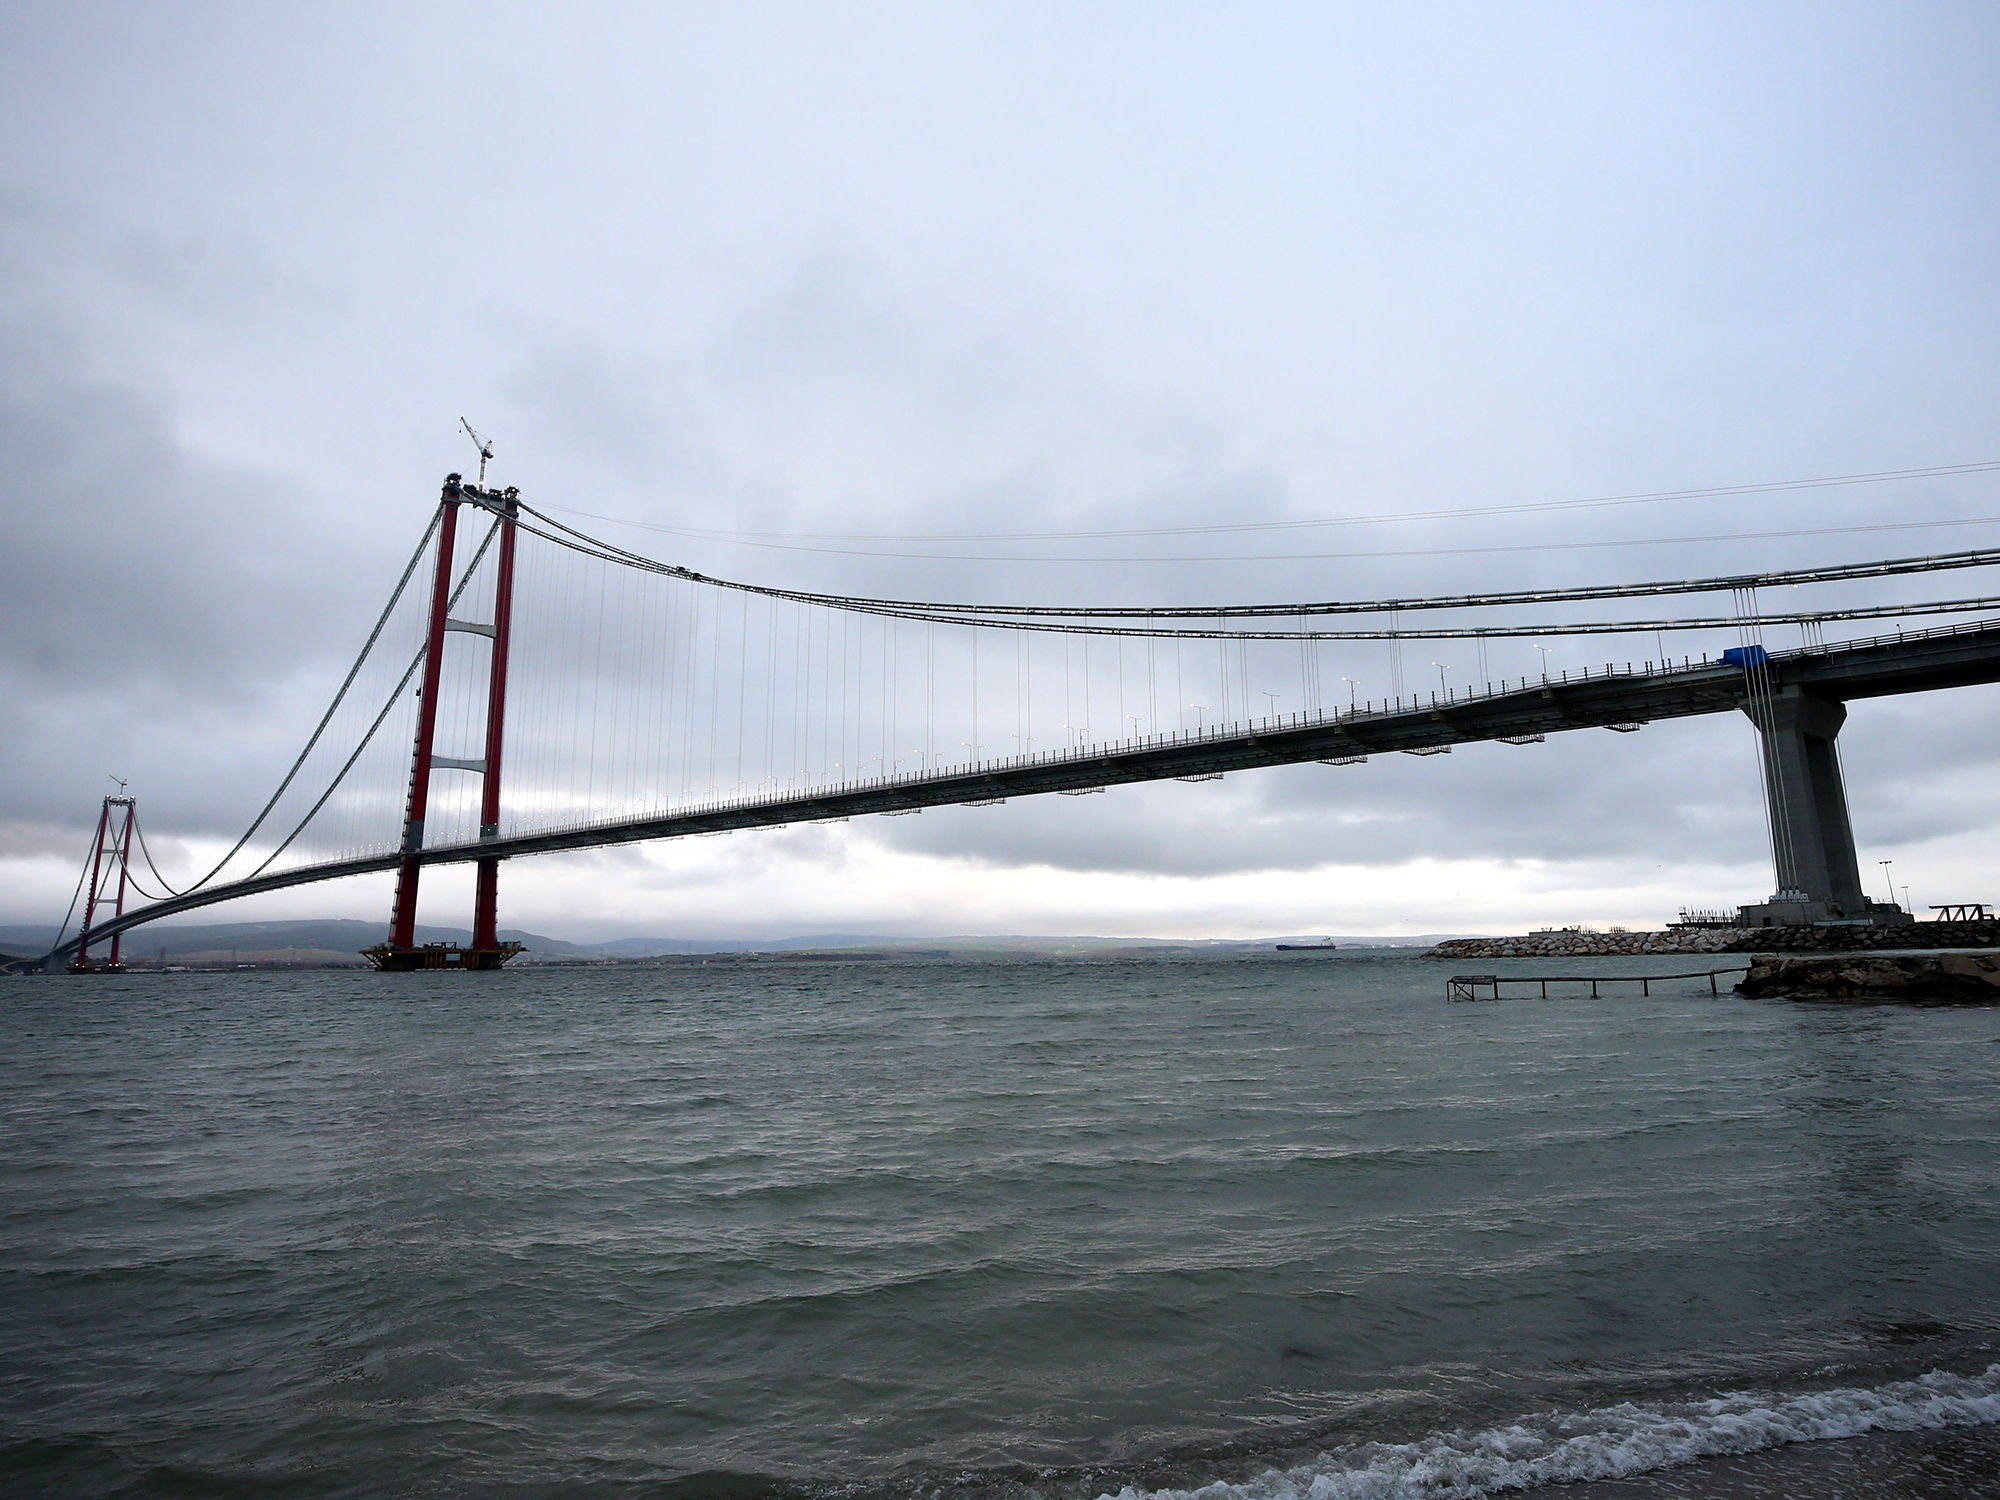 The 1915 Canakkale Bridge connects the Lapseki district to the Gelibolu in Turkey.